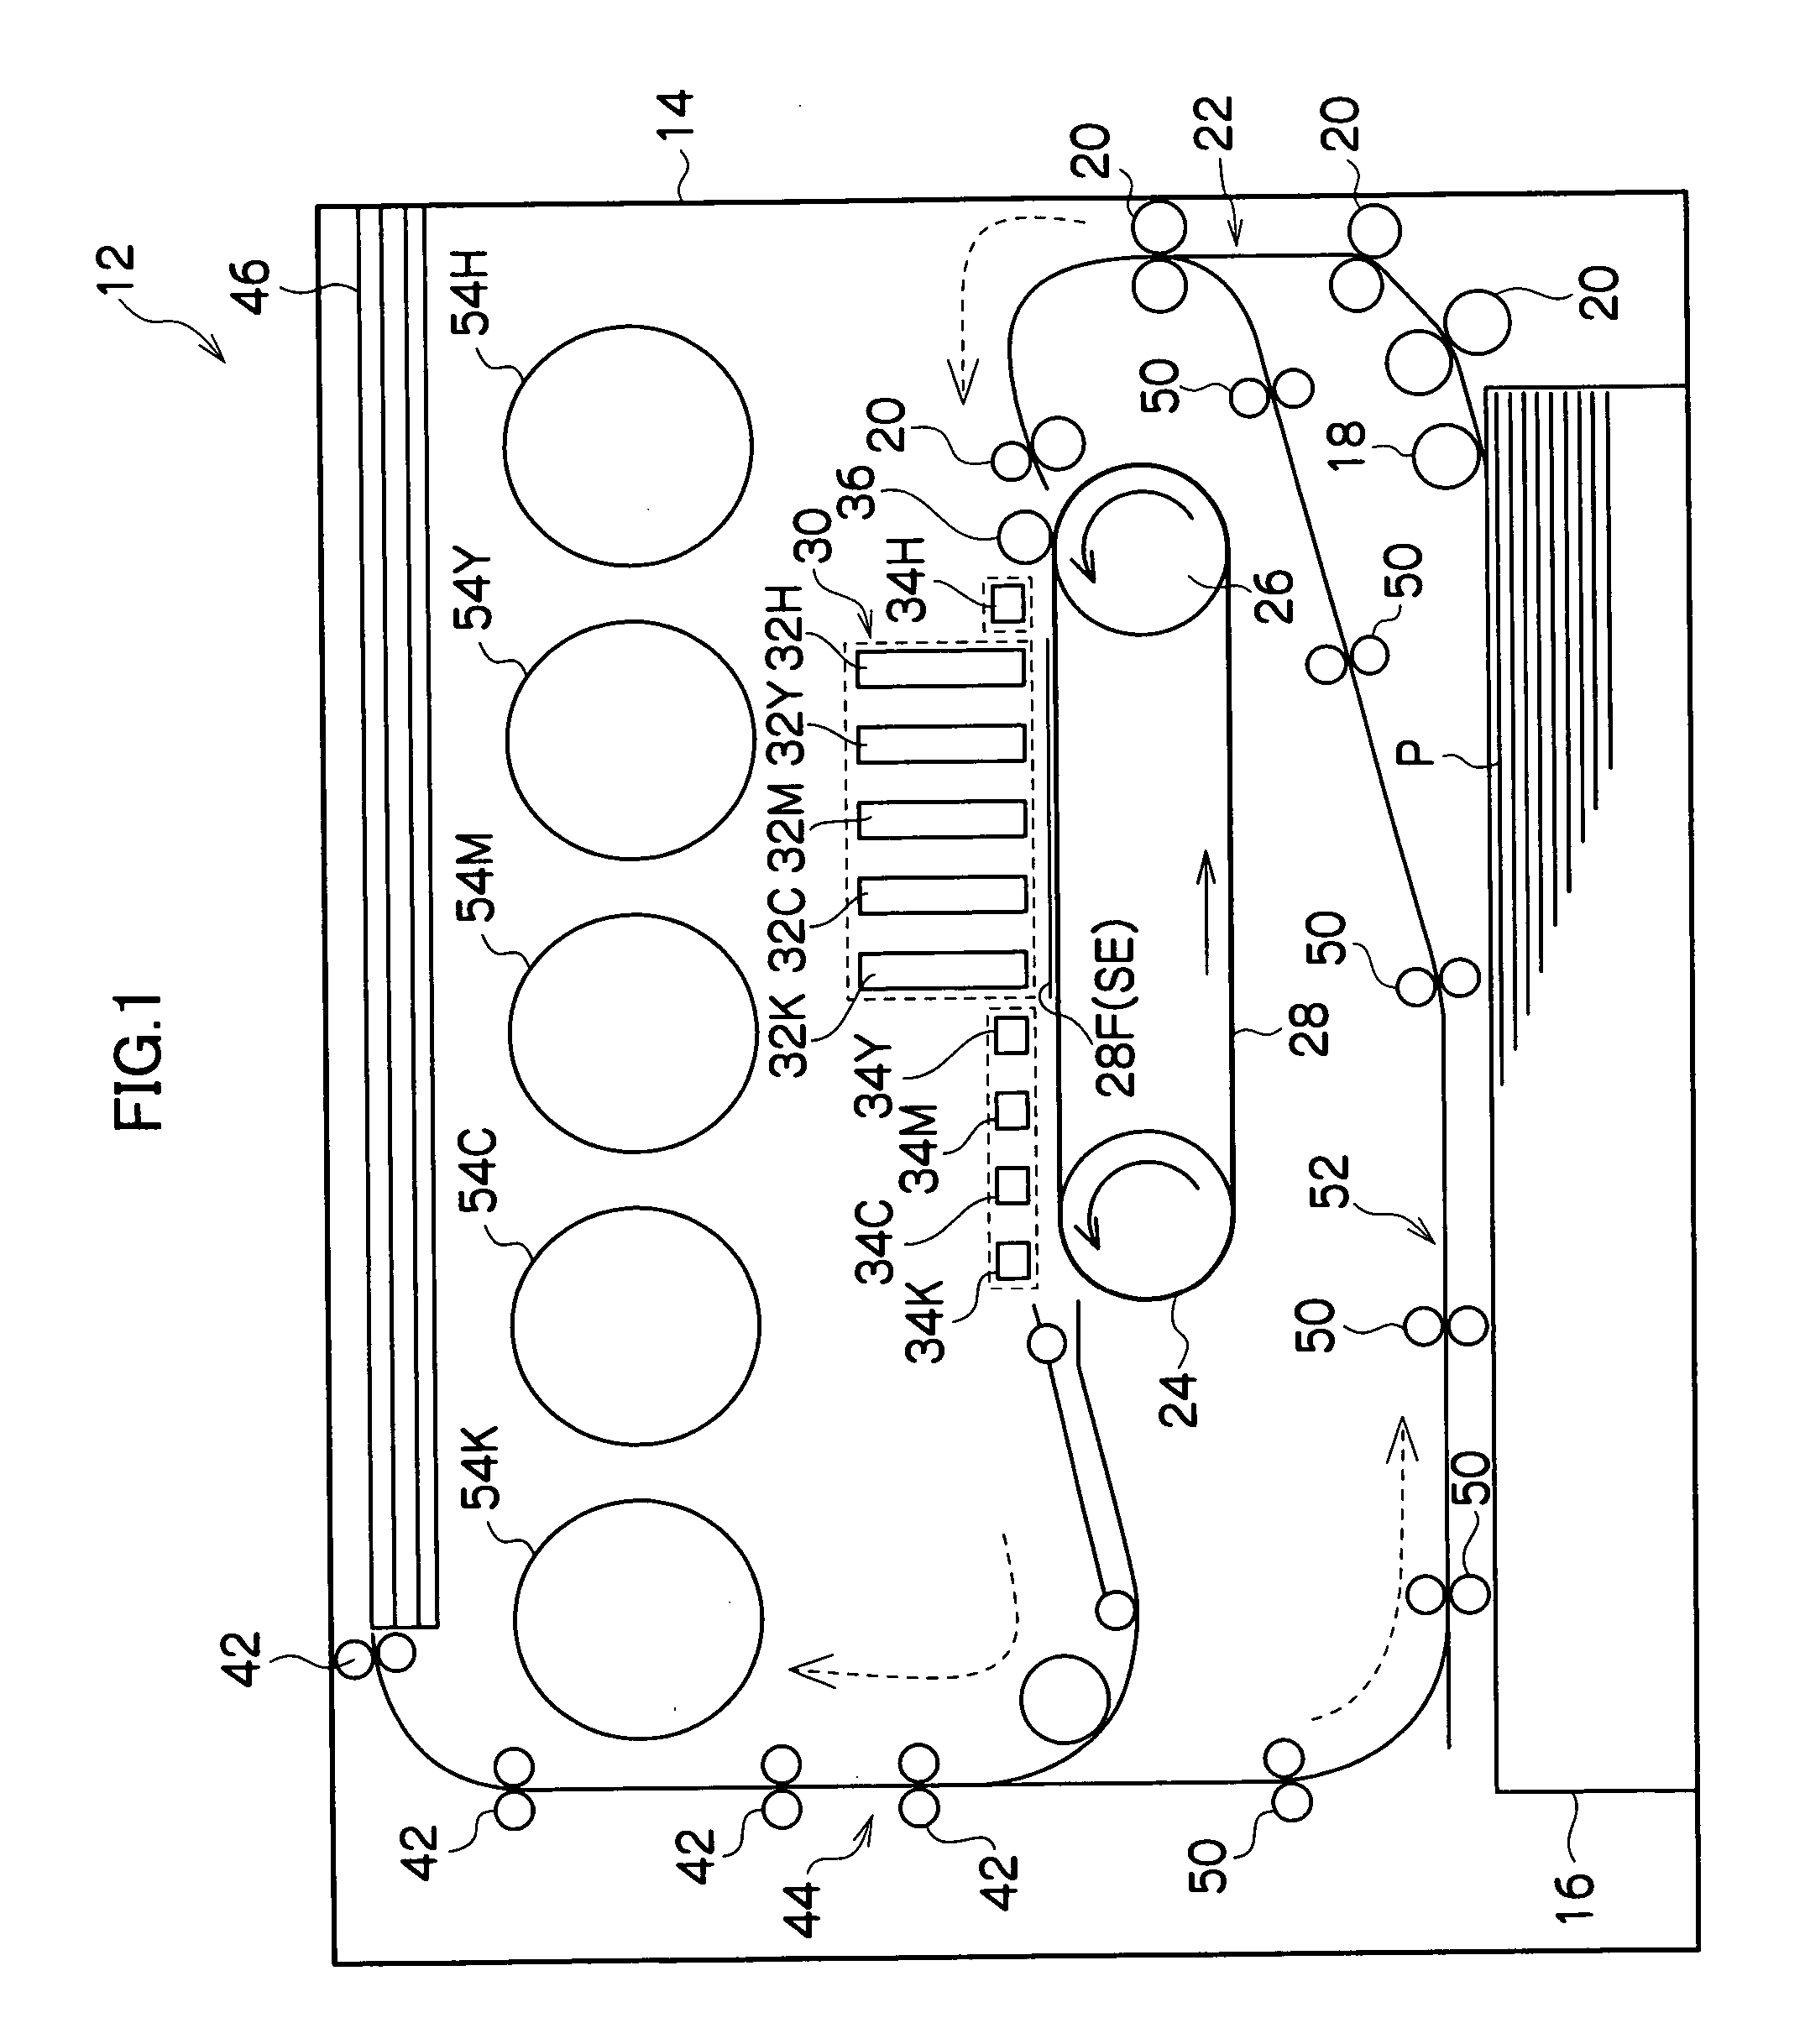 Image forming apparatus, image forming method, and image forming program